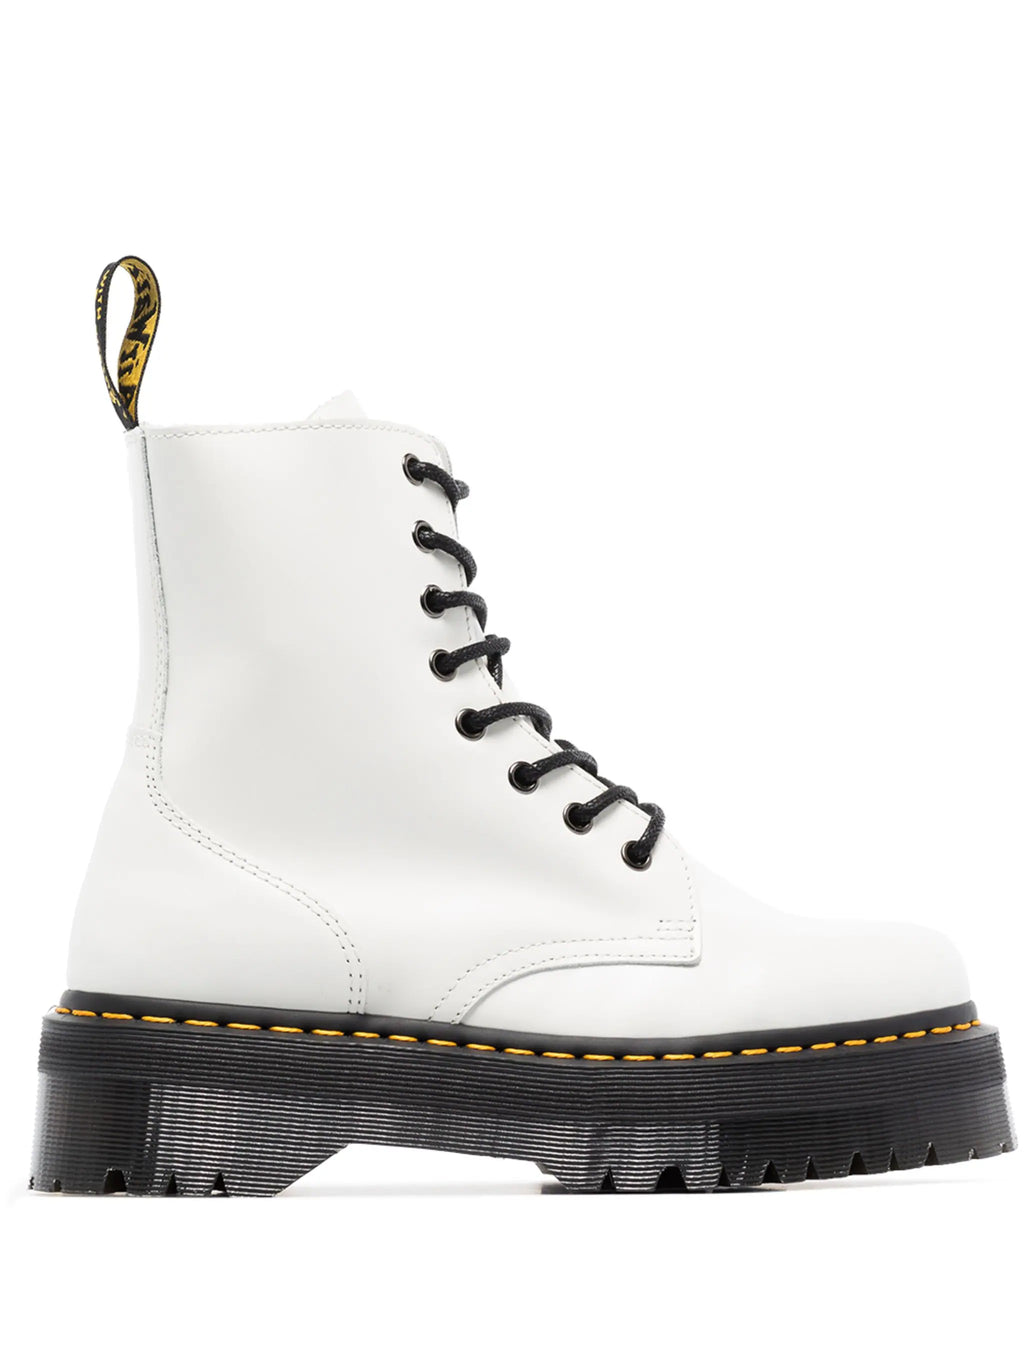 DR. MARTENS Jadon Polished Smooth Leather Lace Up Boots